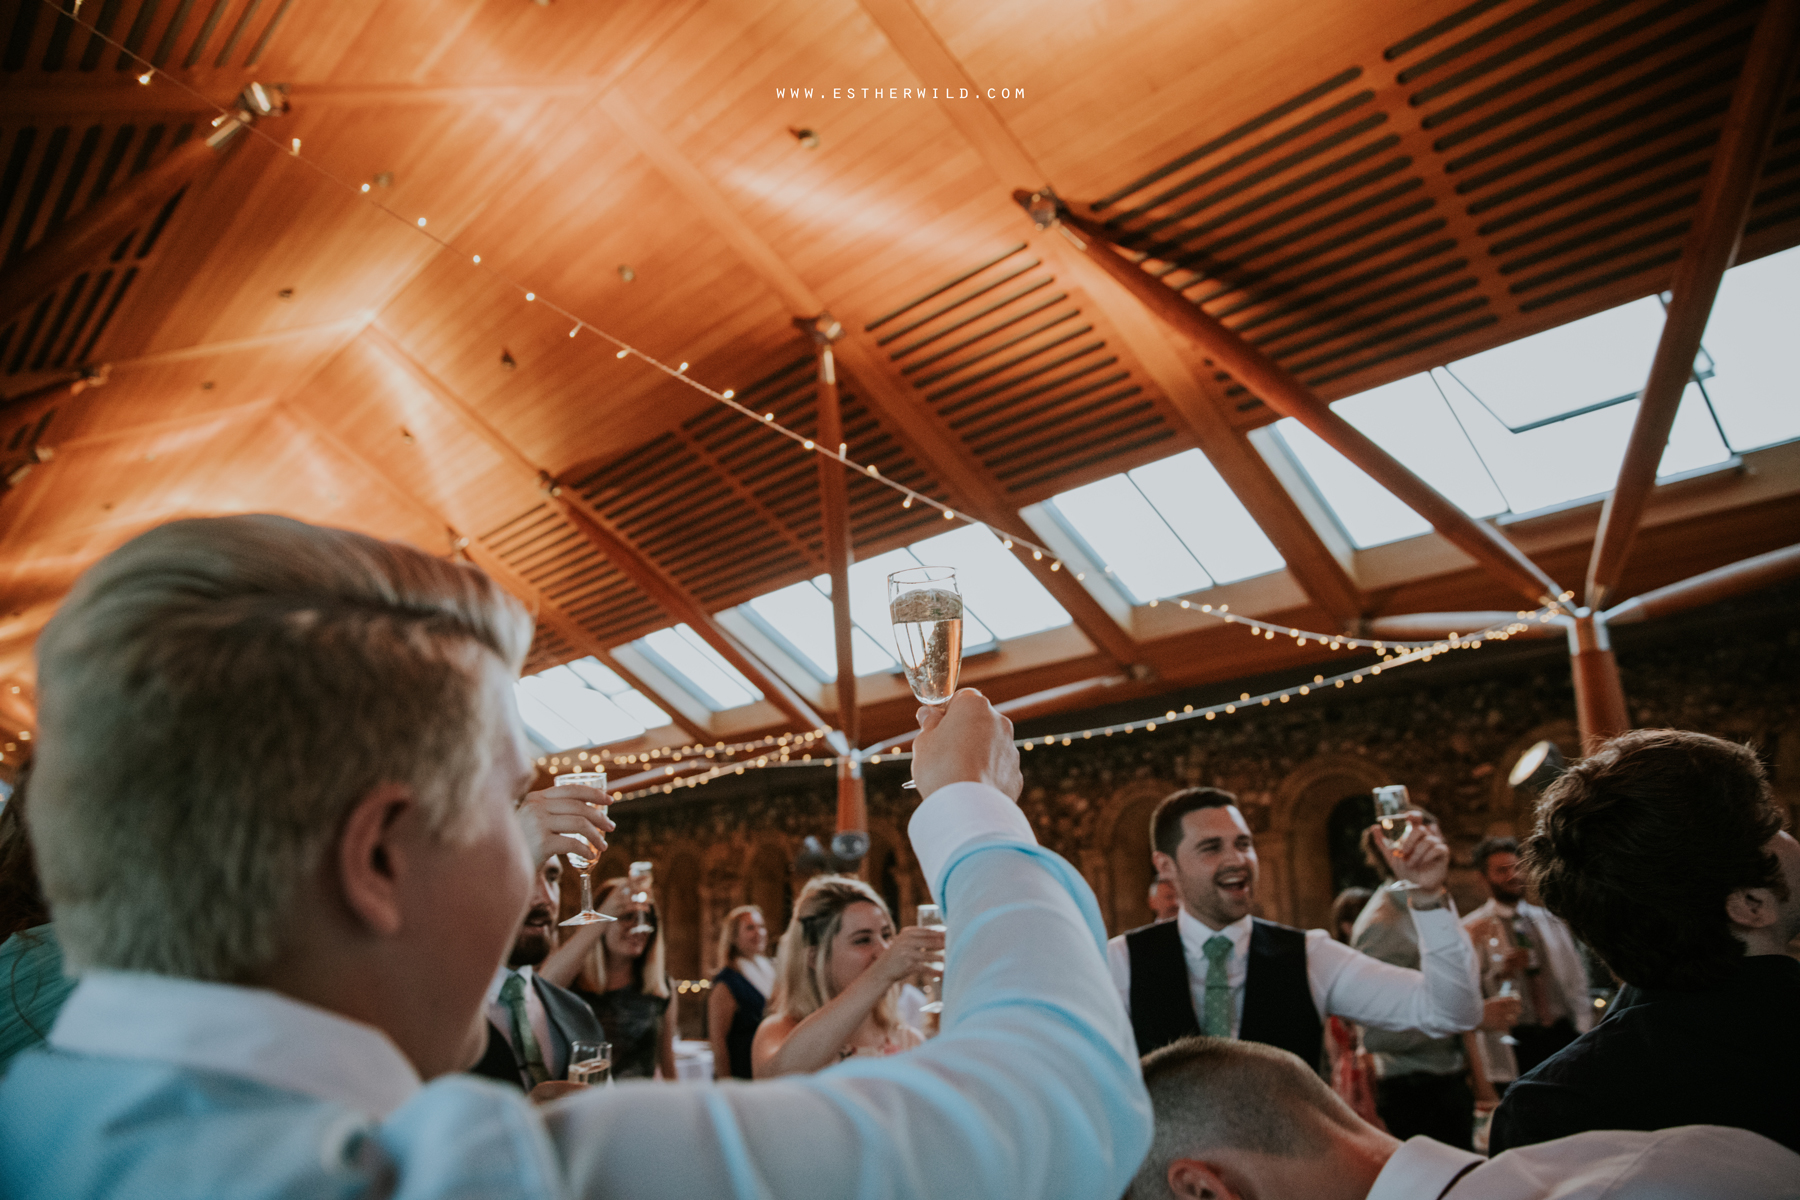 Norwich_Castle_Arcade_Grosvenor_Chip_Birdcage_Cathedral_Cloisters_Refectory_Wedding_Photography_Esther_Wild_Photographer_Norfolk_Kings_Lynn_3R8A3100.jpg